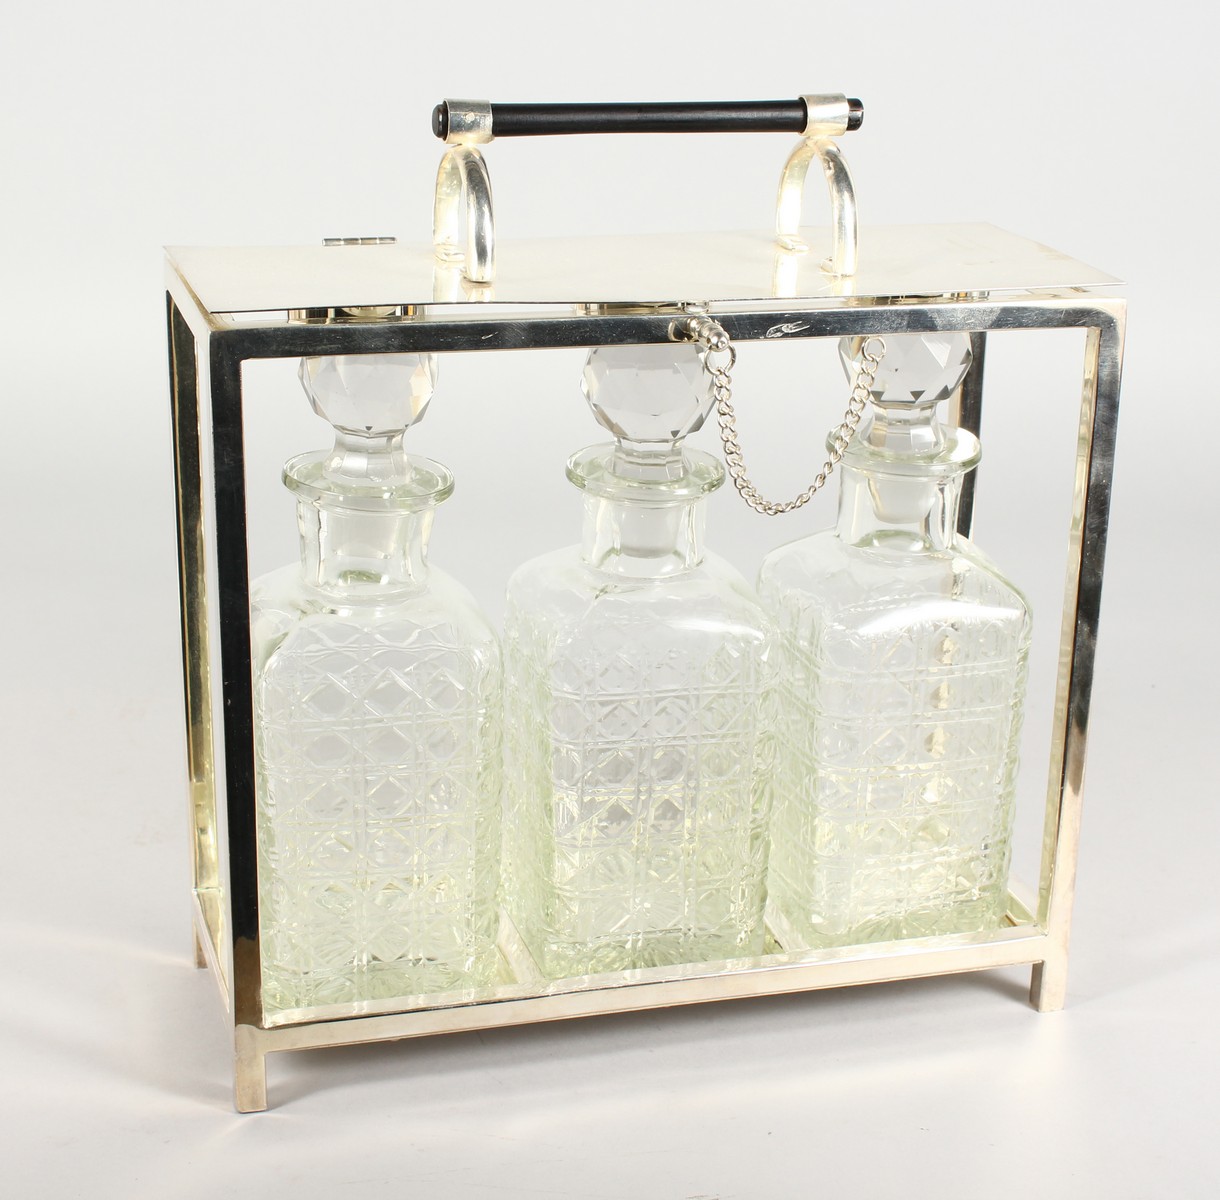 A CHRISTOPHER DRESSER DESIGN THREE BOTTLE TANTALUS with three cut glass whisky decanters and